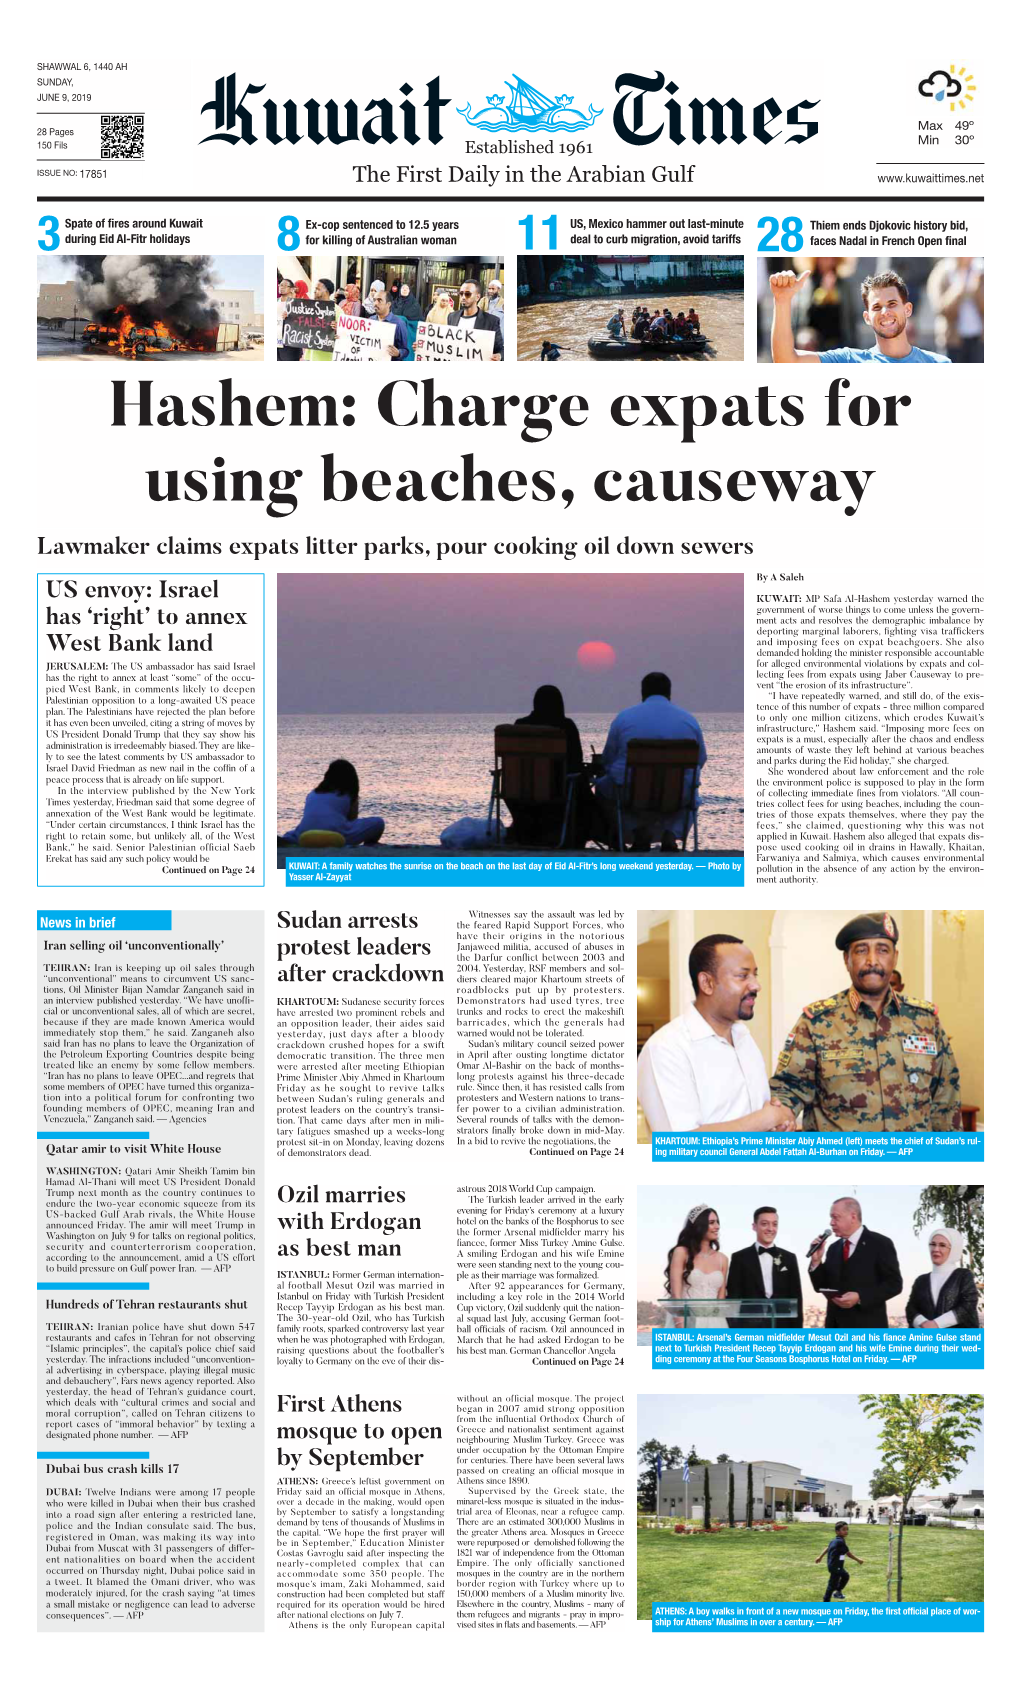 Hashem: Charge Expats for Using Beaches, Causeway Lawmaker Claims Expats Litter Parks, Pour Cooking Oil Down Sewers